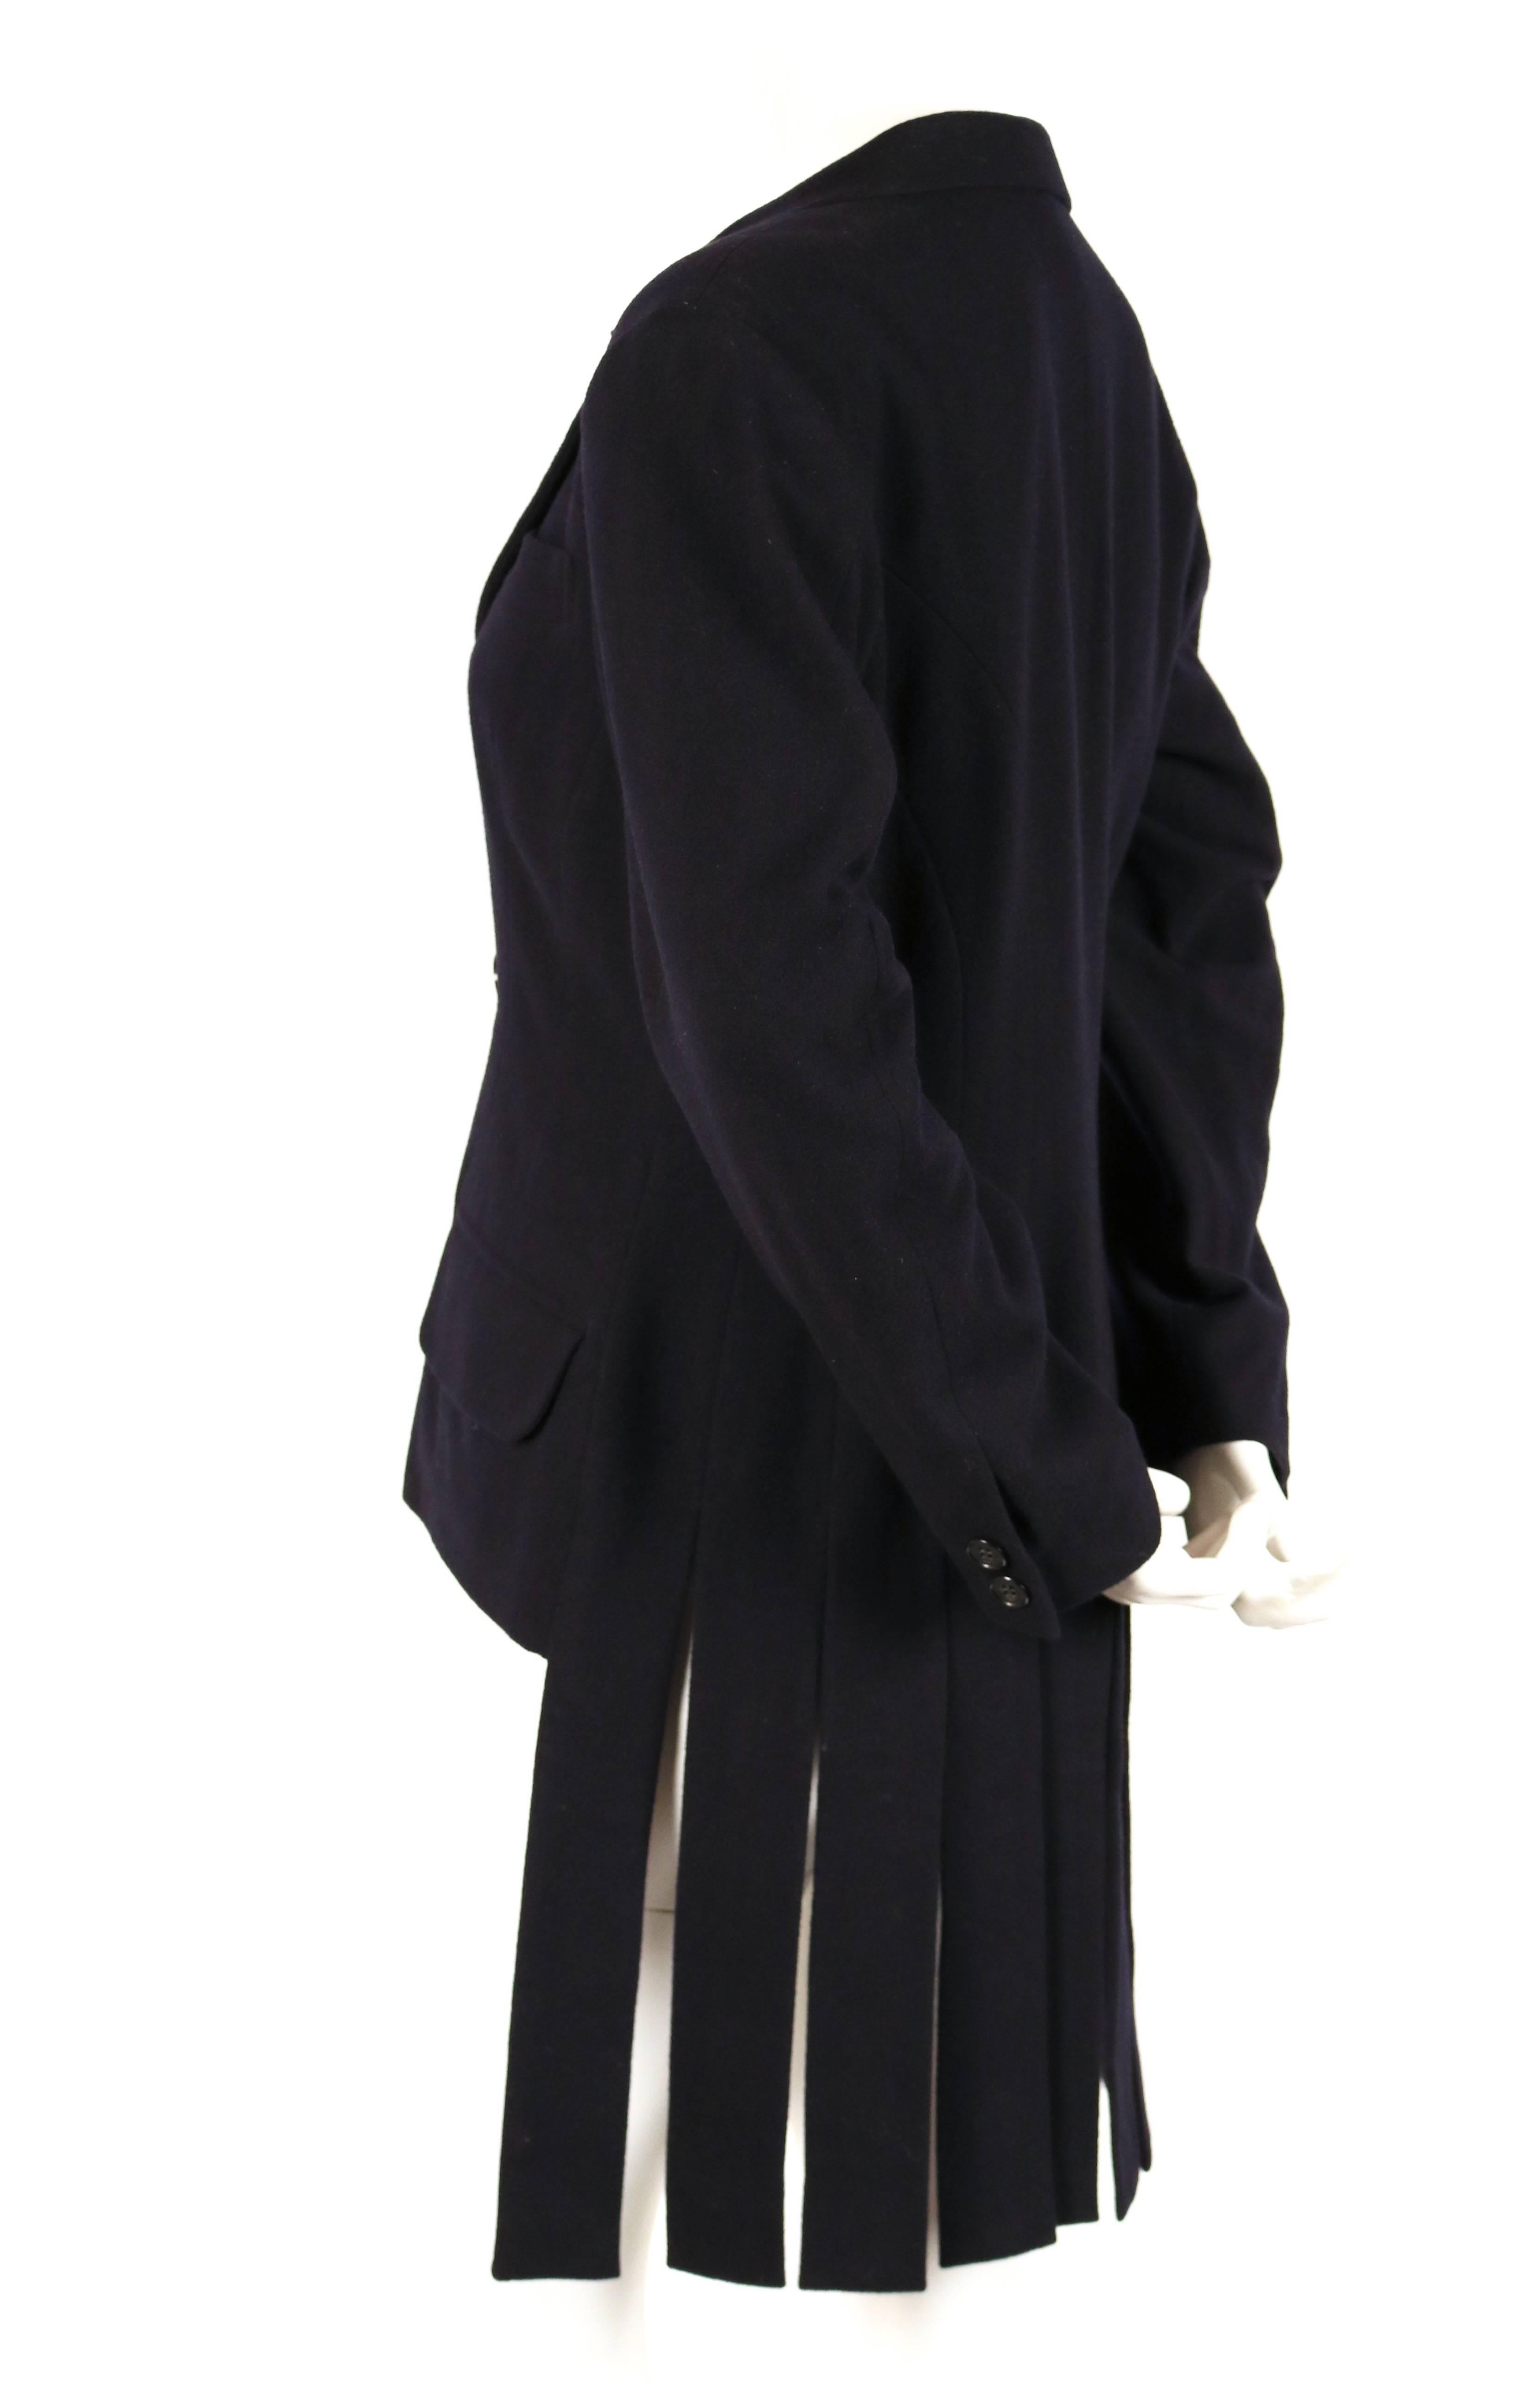 Very rare and unique black wool jacket with carwash hemline designed by Yohji Yamamoto dating to the 1980's. Jacket is labeled a size 'S'. Approximate measurements: shoulder 17